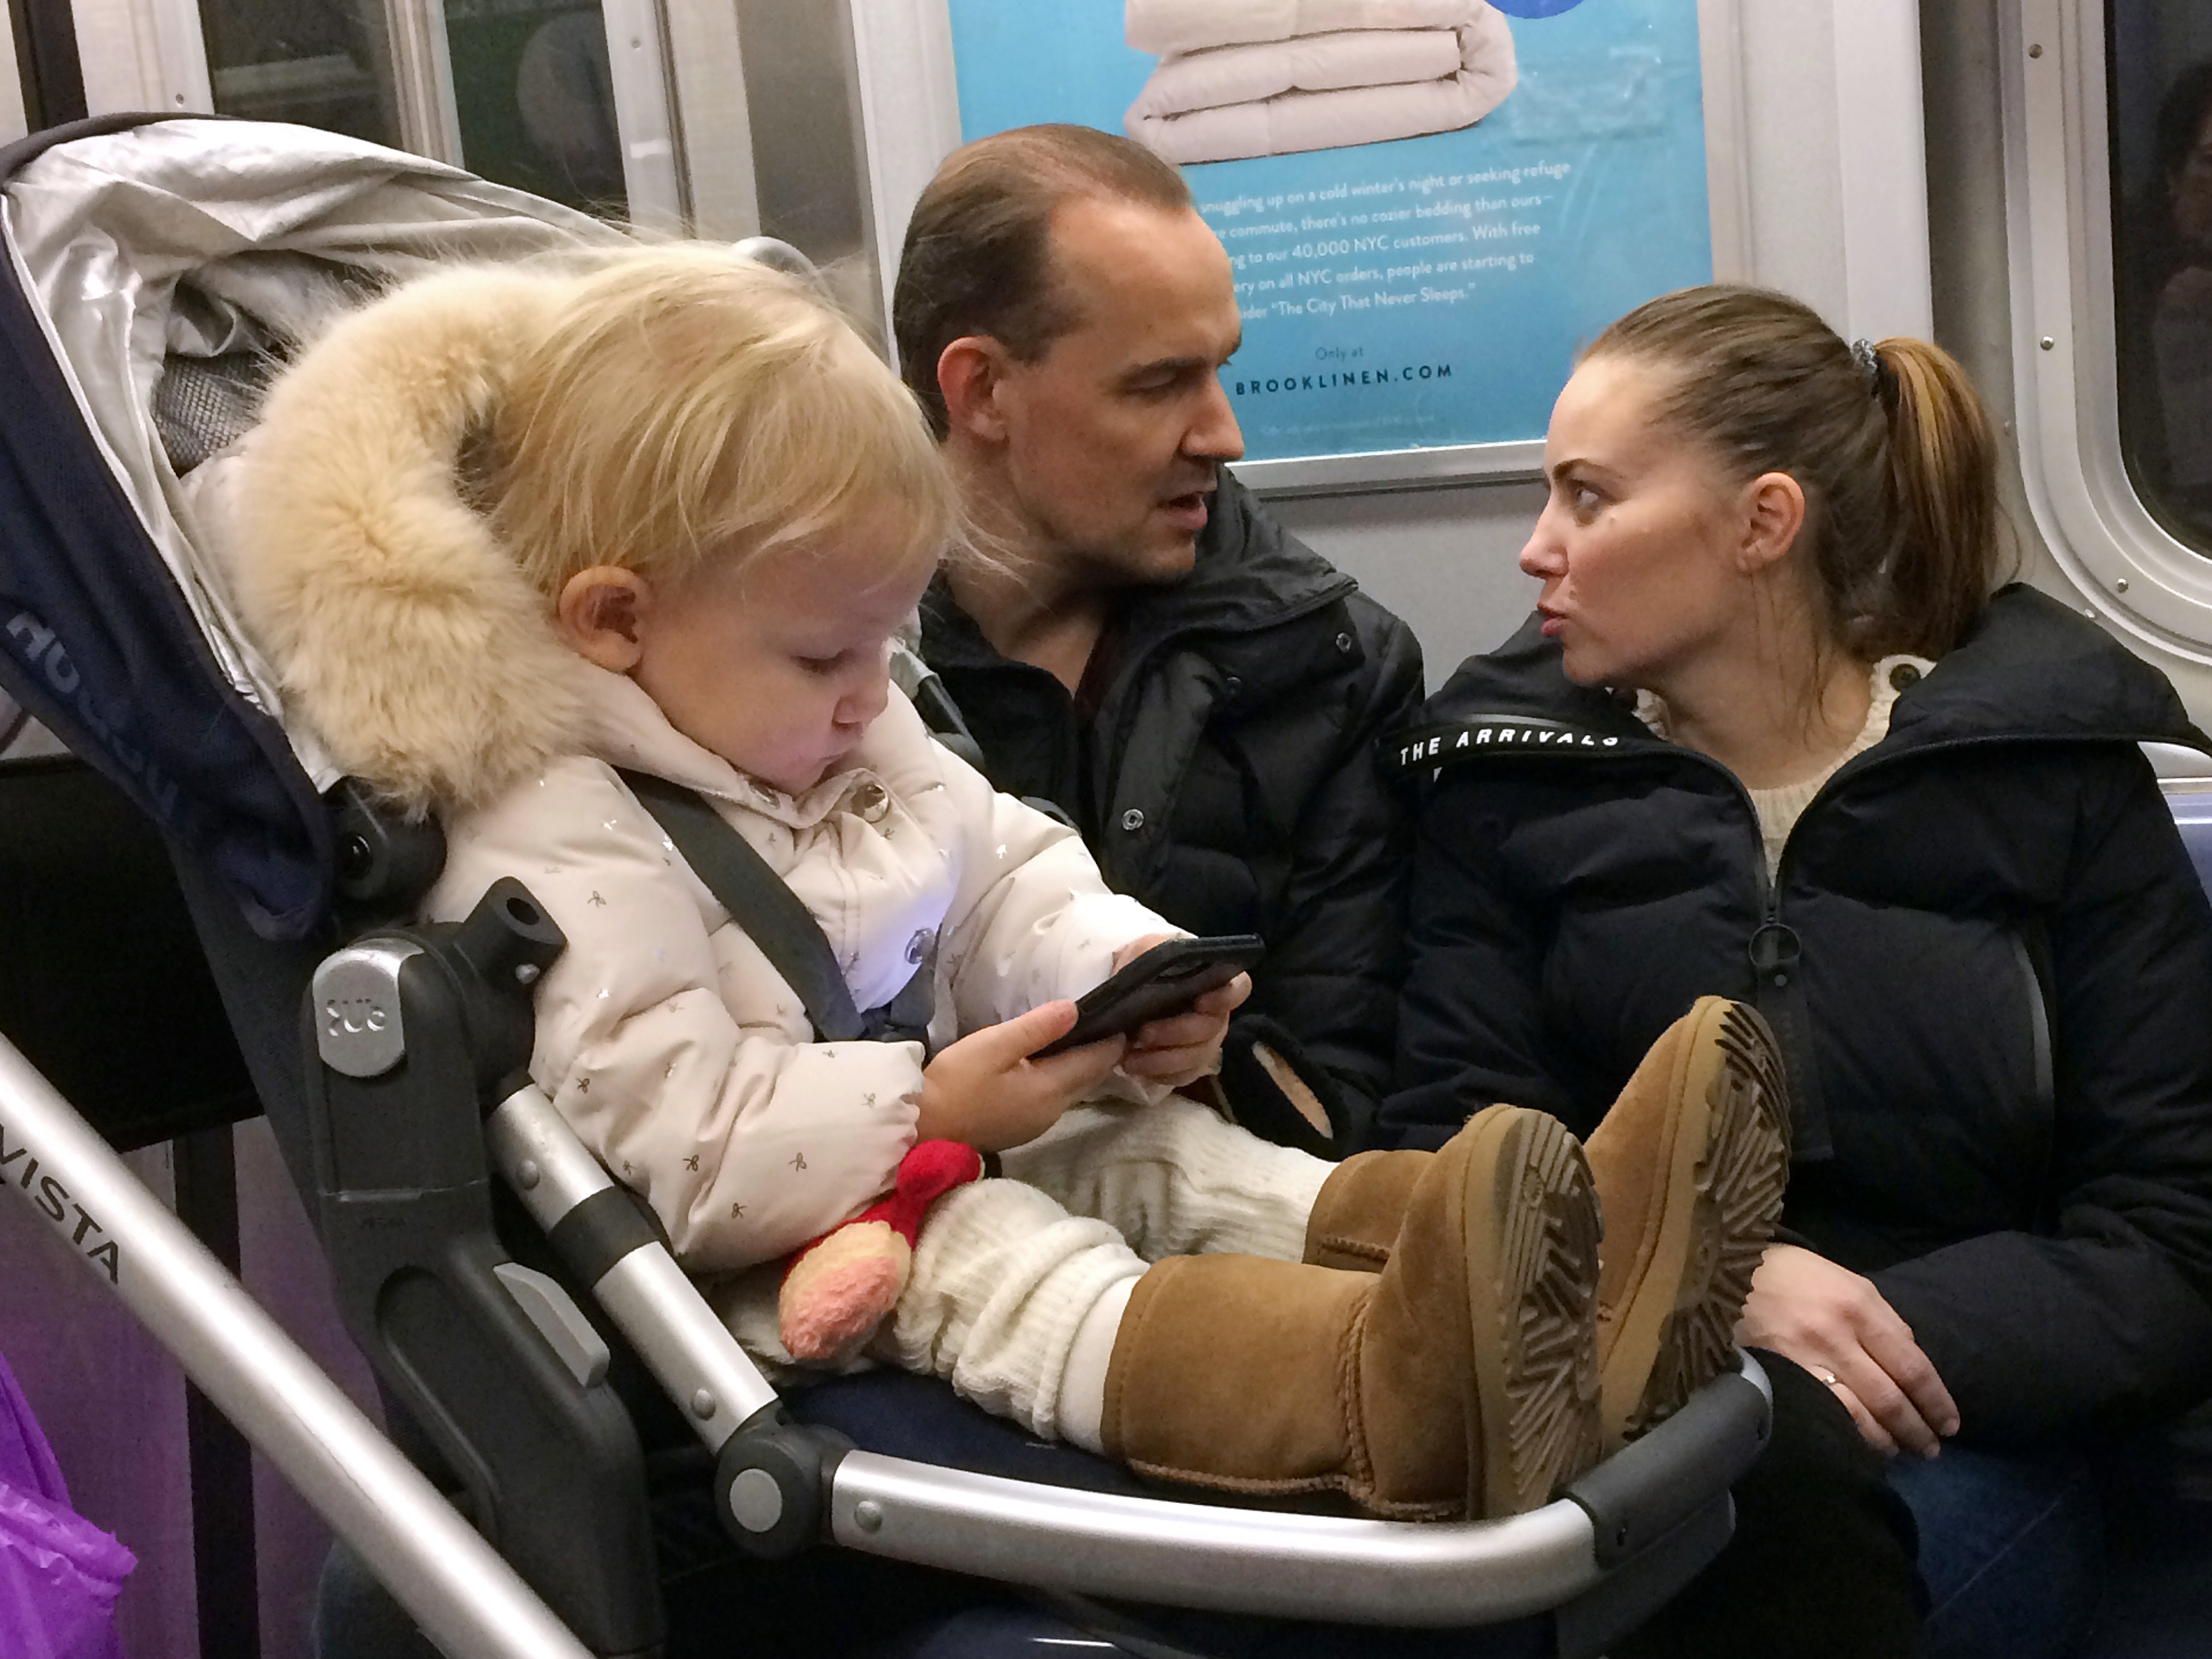 A child plays with a mobile phone while riding in a New York subway in December. Two major Apple investors urged the iPhone maker to take action to curb growing smartphone use among children.
